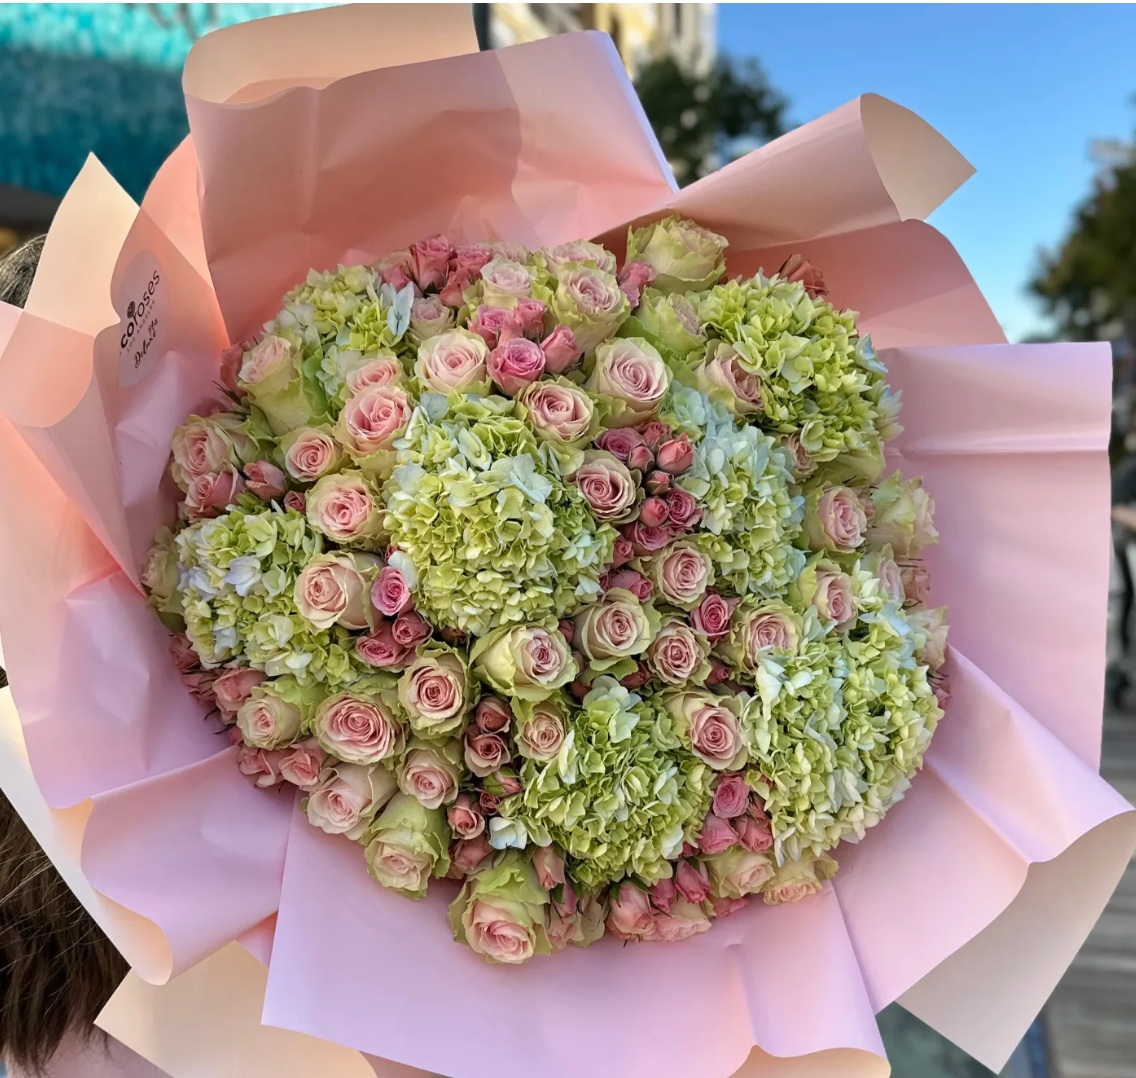 Hand tied Deluxe Plus Bouquet PinkDream with total of 50 stems of Fruttetto Roses including spray roses, Hydrangeas, fillers & paper wrapped -Flowers Glendale Ca